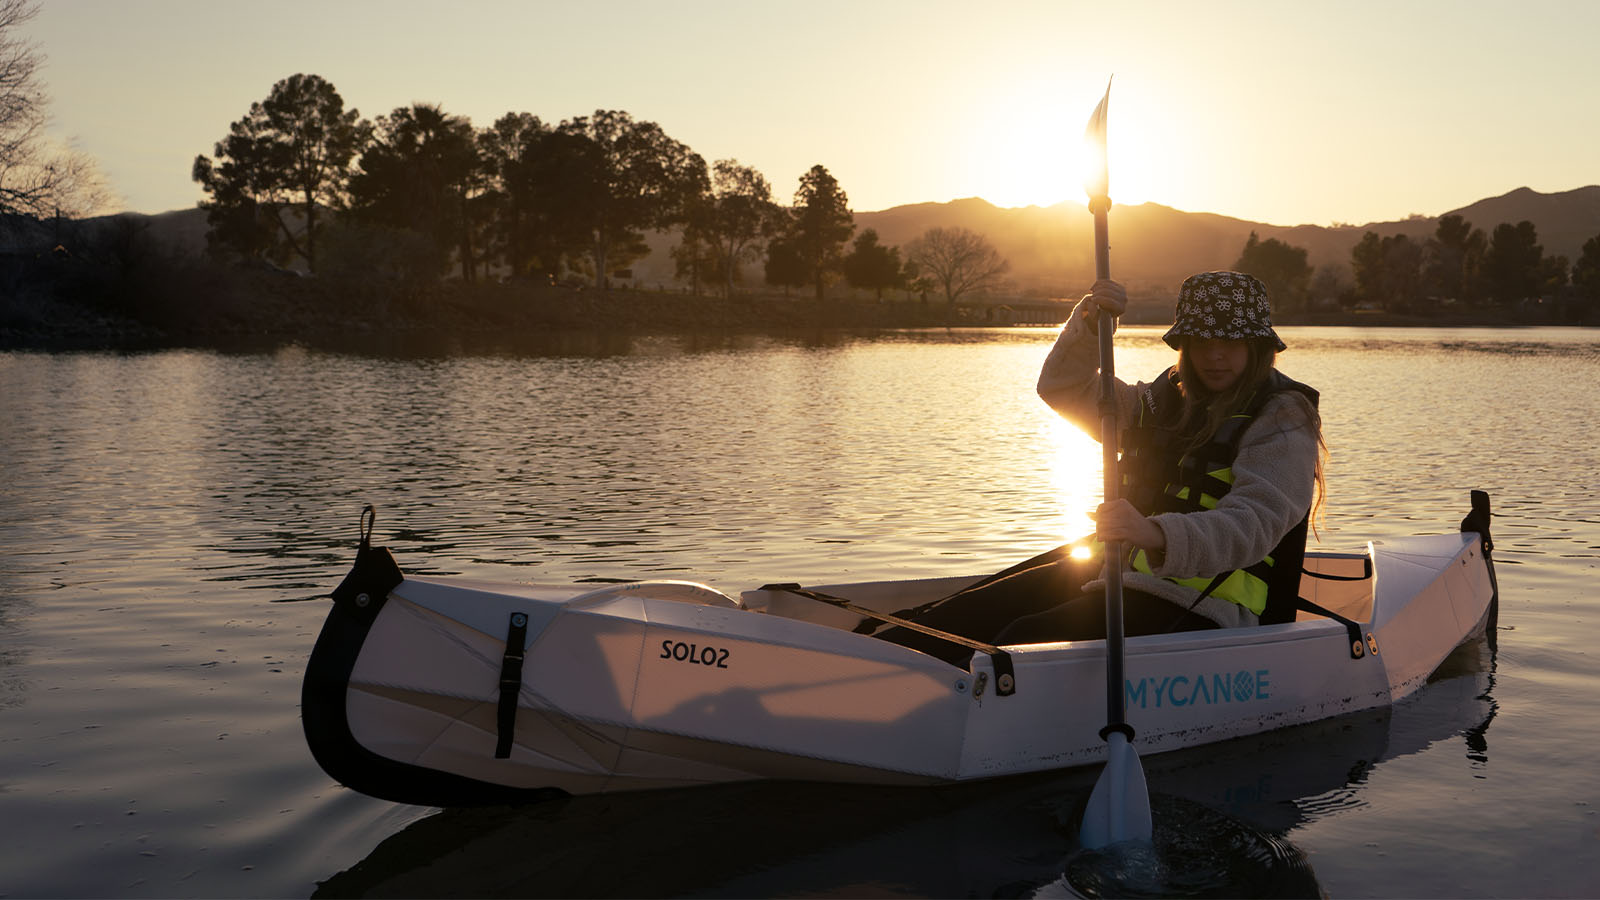 woman rowing her MyCanoe solo 2 origami canoe in the sunset